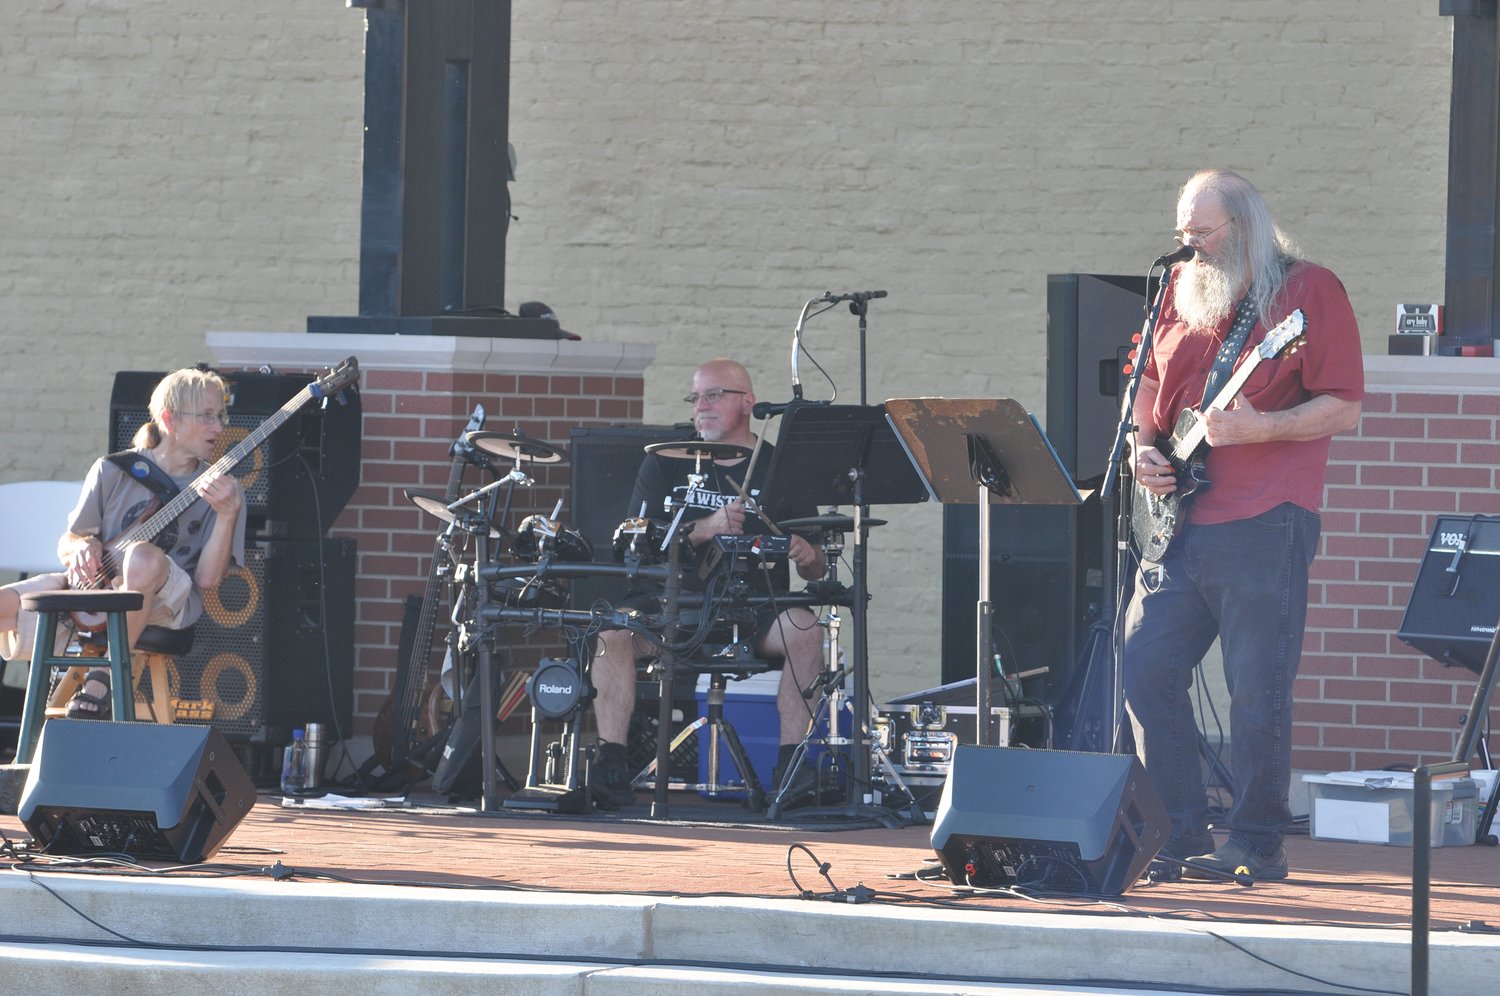 The Monte Keller Blues Band performs for the kickoff of Crawfordsville Main Street's First Friday Concert Series.